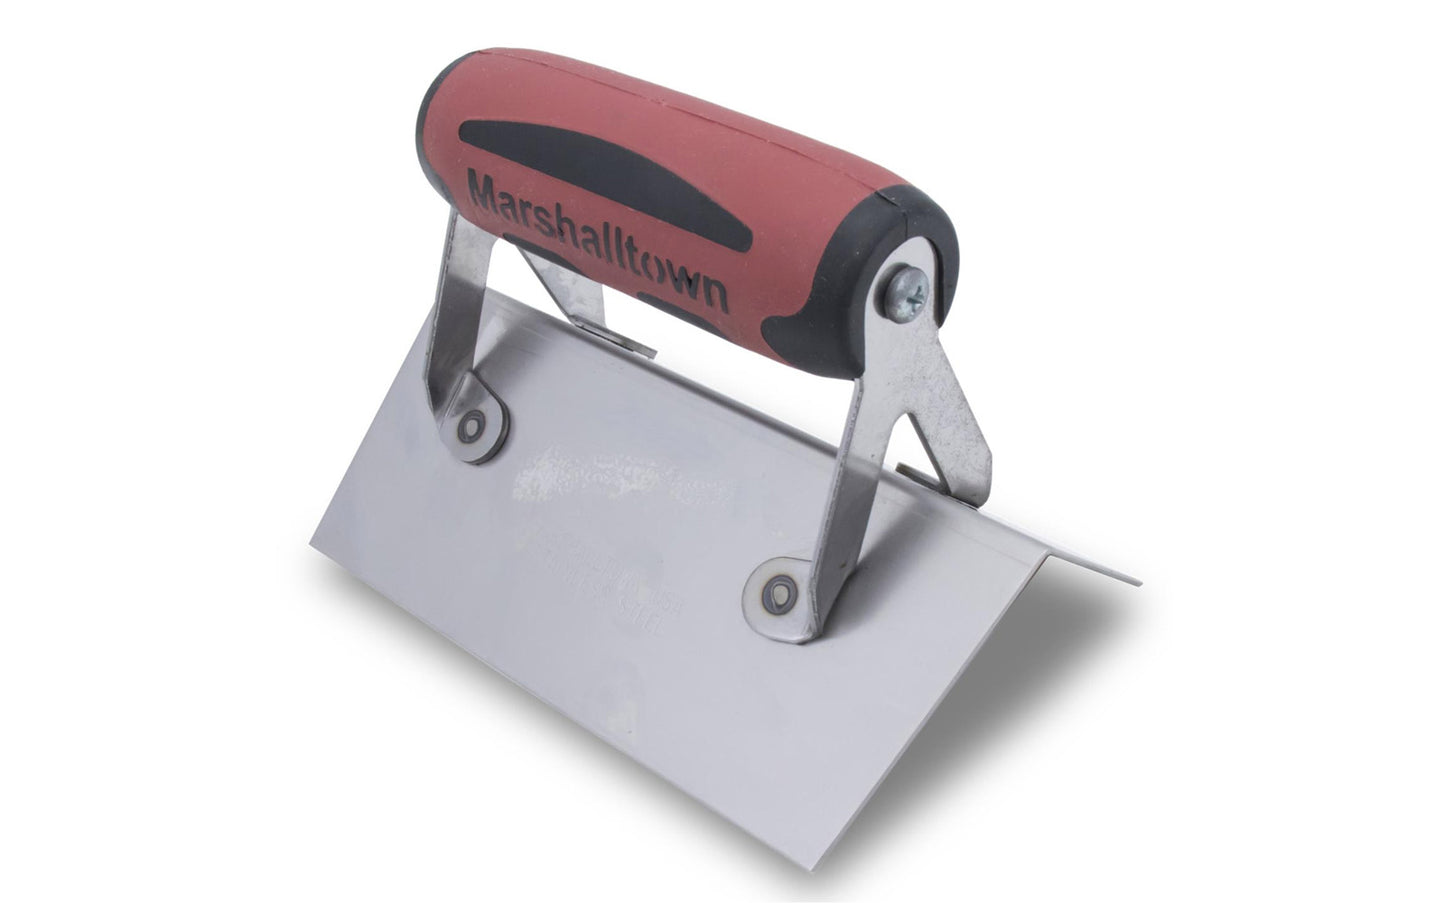 Marshalltown 6" x 2-1/2" Stainless Outside Corner Trowel - Radius Corner Style. Ideal for creating corners & edges on concrete steps or anywhere where square and rounded corners are needed. The stainless steel blade is durable, easy to clean, and is fitted with a comfortable soft grip "DuraSoft" handle that reduces fatigue when using this tool. Model 67SSD ~ 035965041263